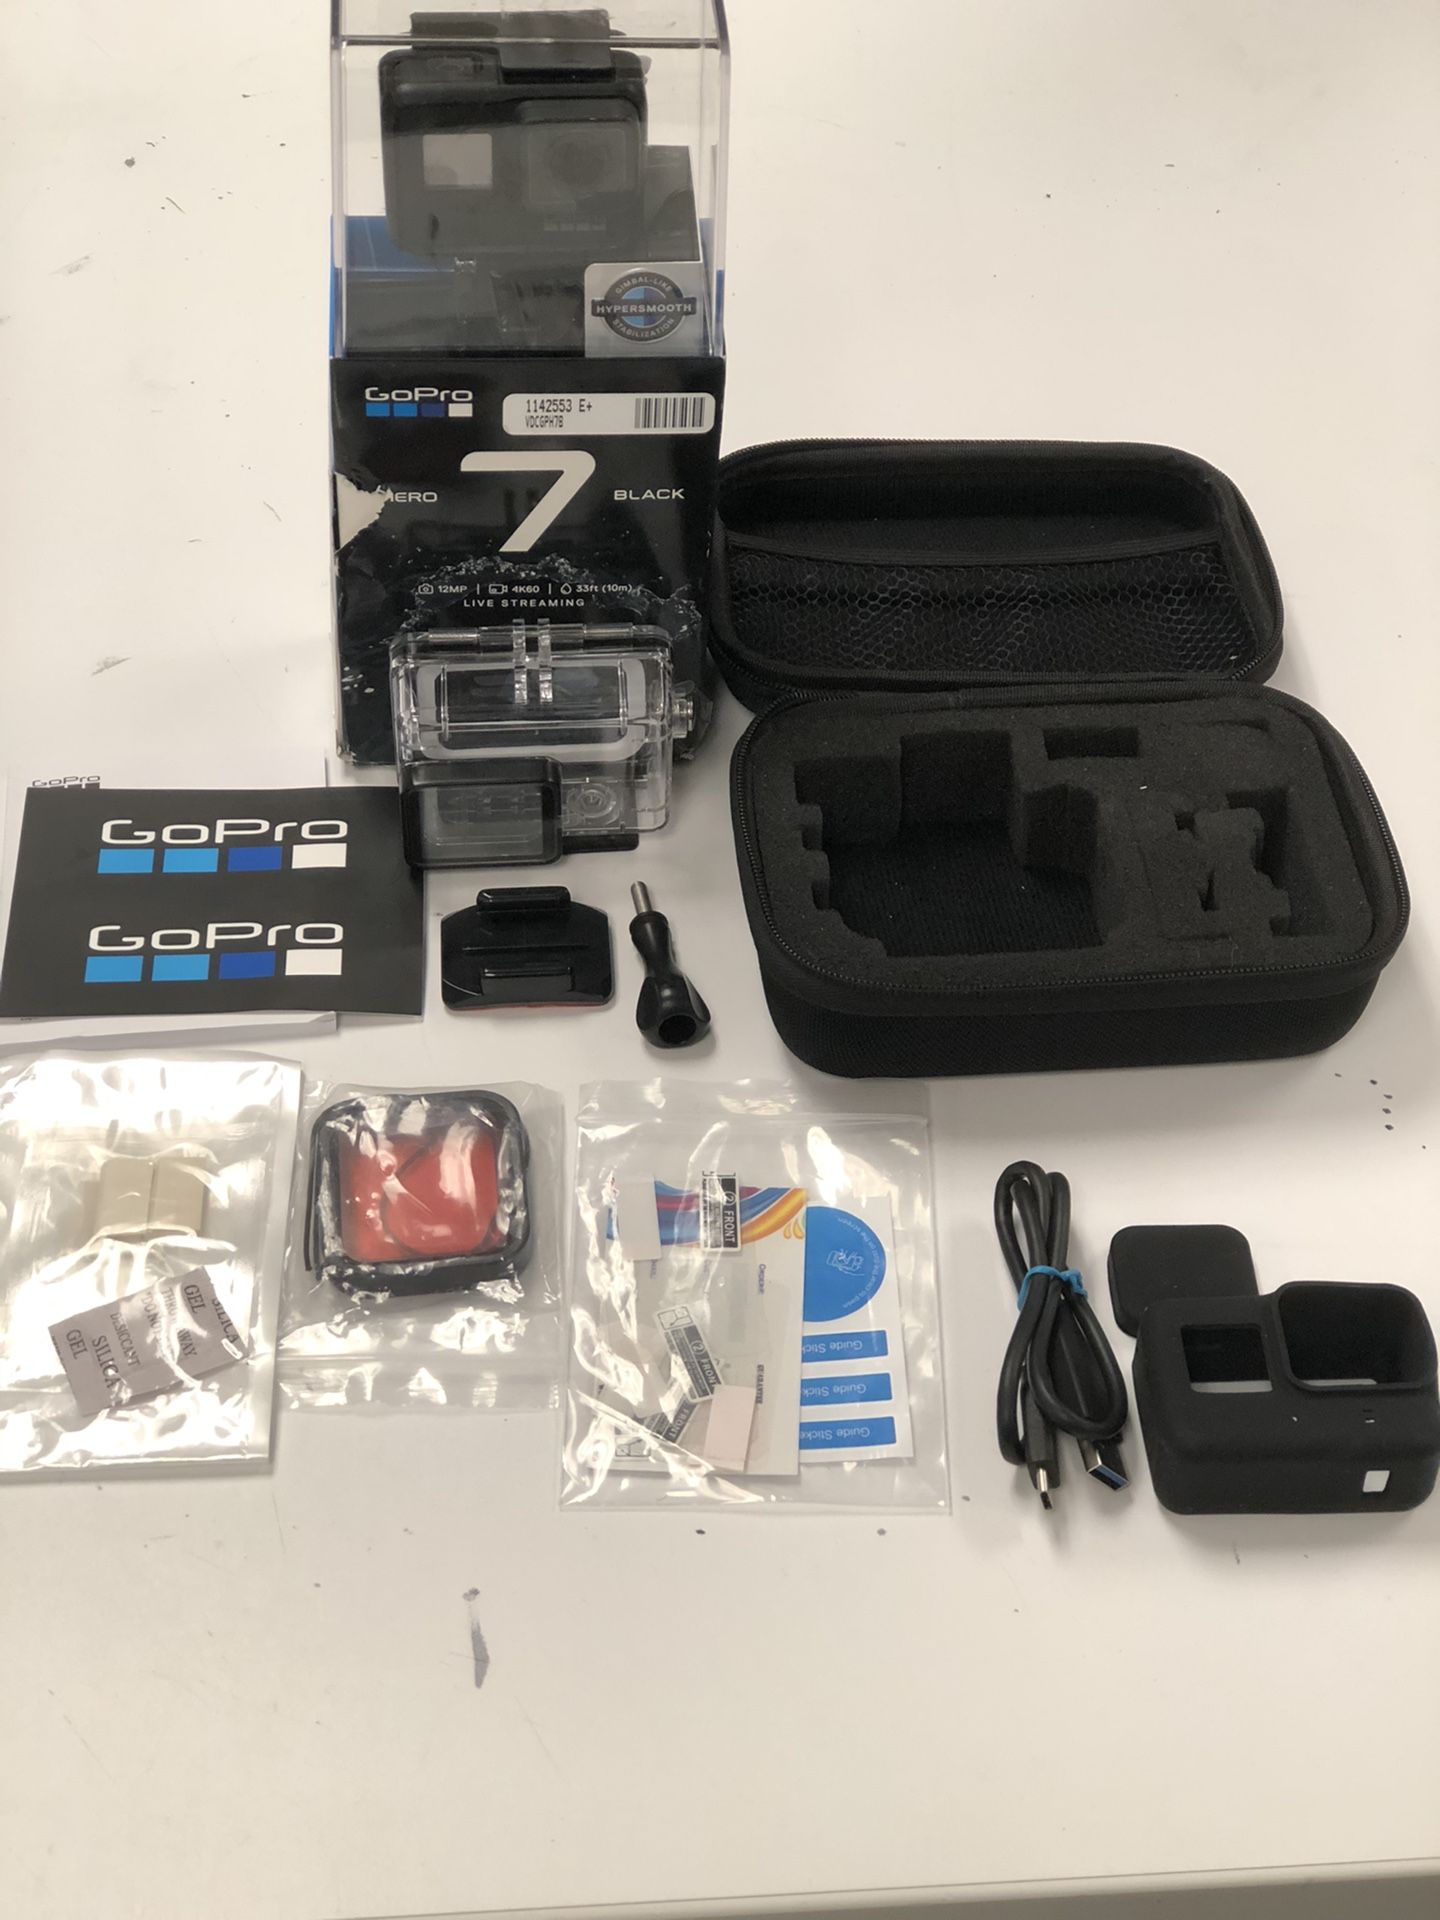 GoPro 7 Black with Accessories! Great Deal and perfect Condition!